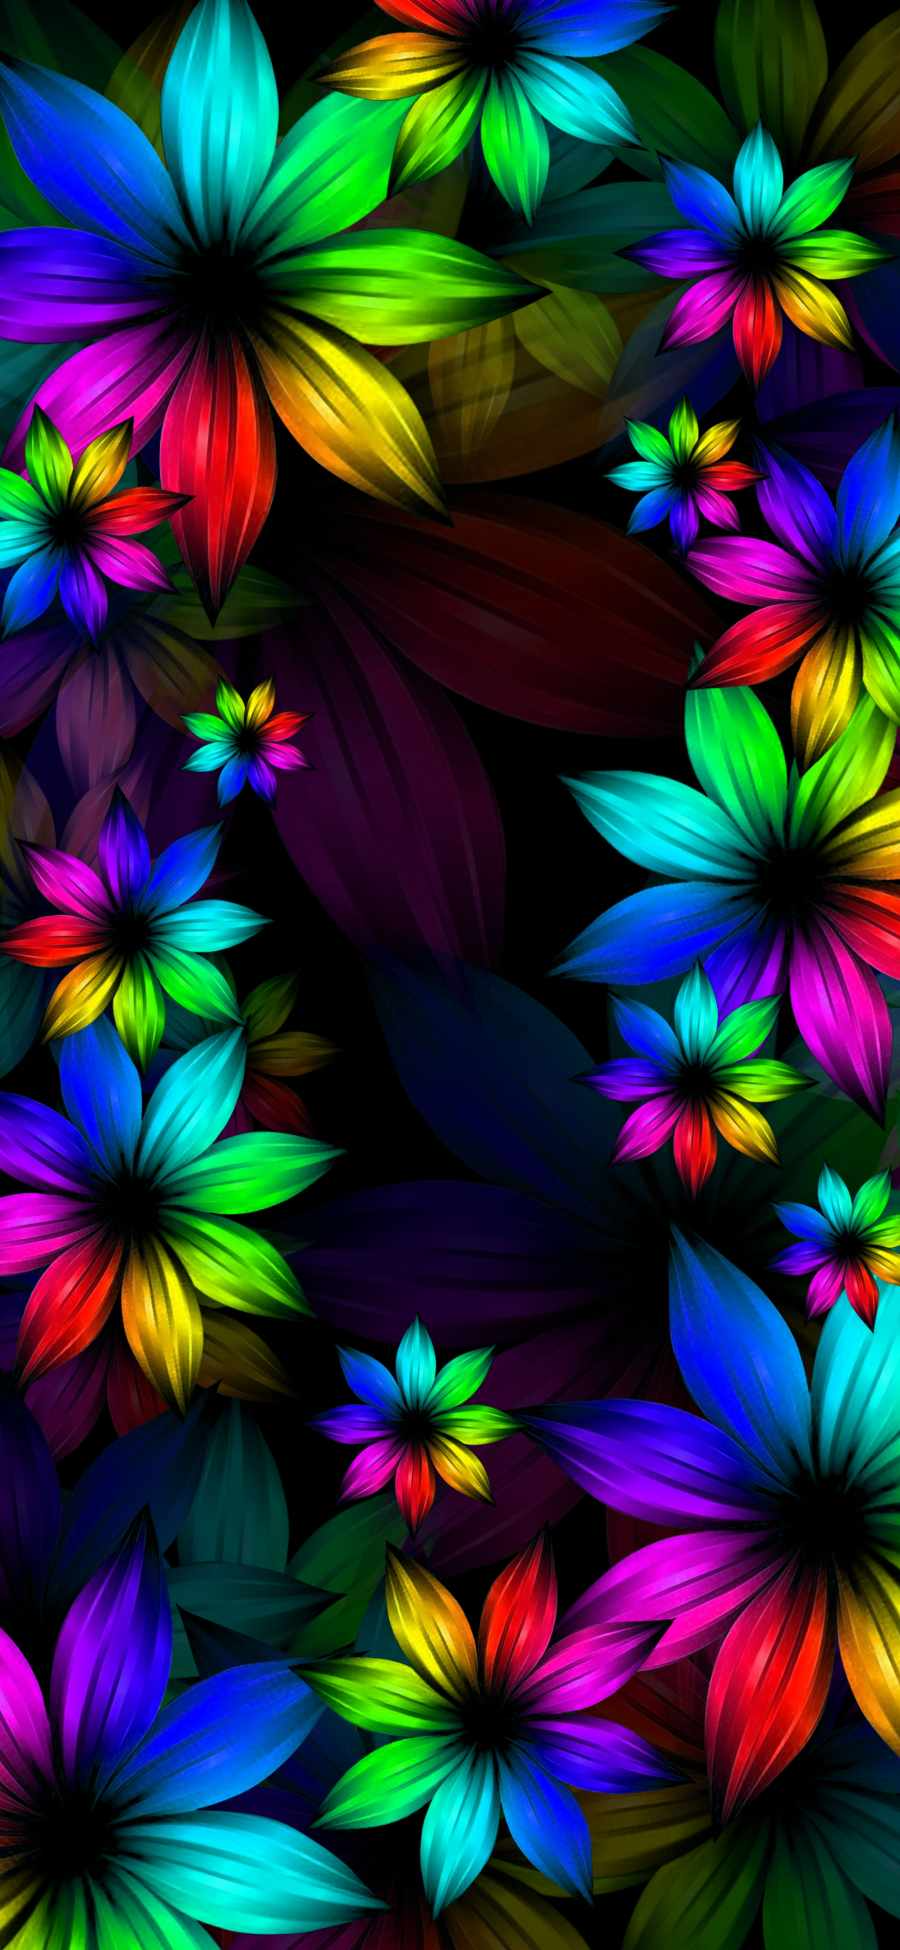 Rainbow Color Flowers IPhone Wallpaper HD  IPhone Wallpapers